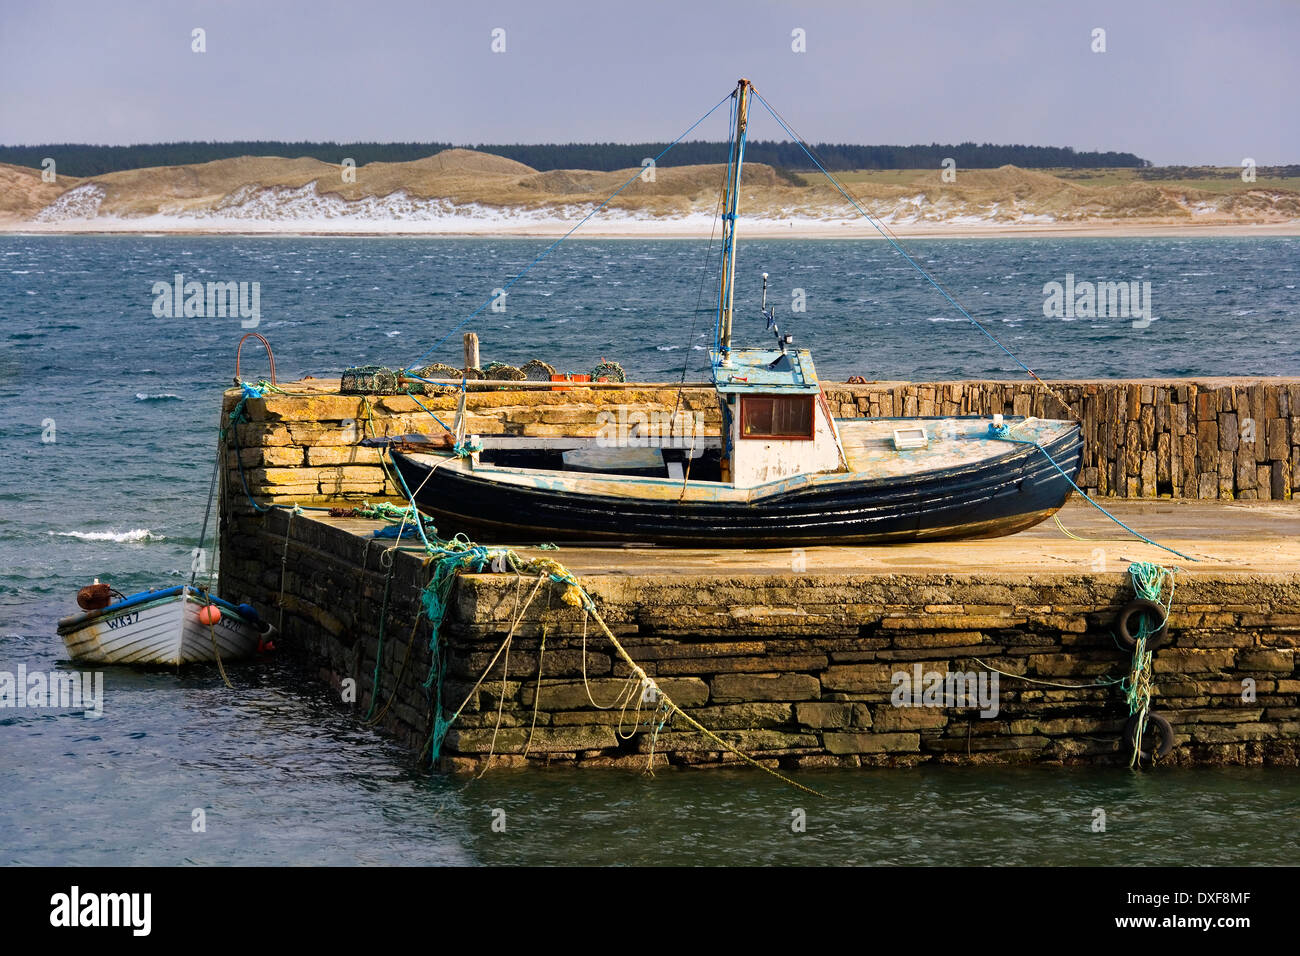 Castletown Harbor near Dunnet Head in northern Scotland. UK. Dunnet Head is the most northerly point on the British mainland. Stock Photo